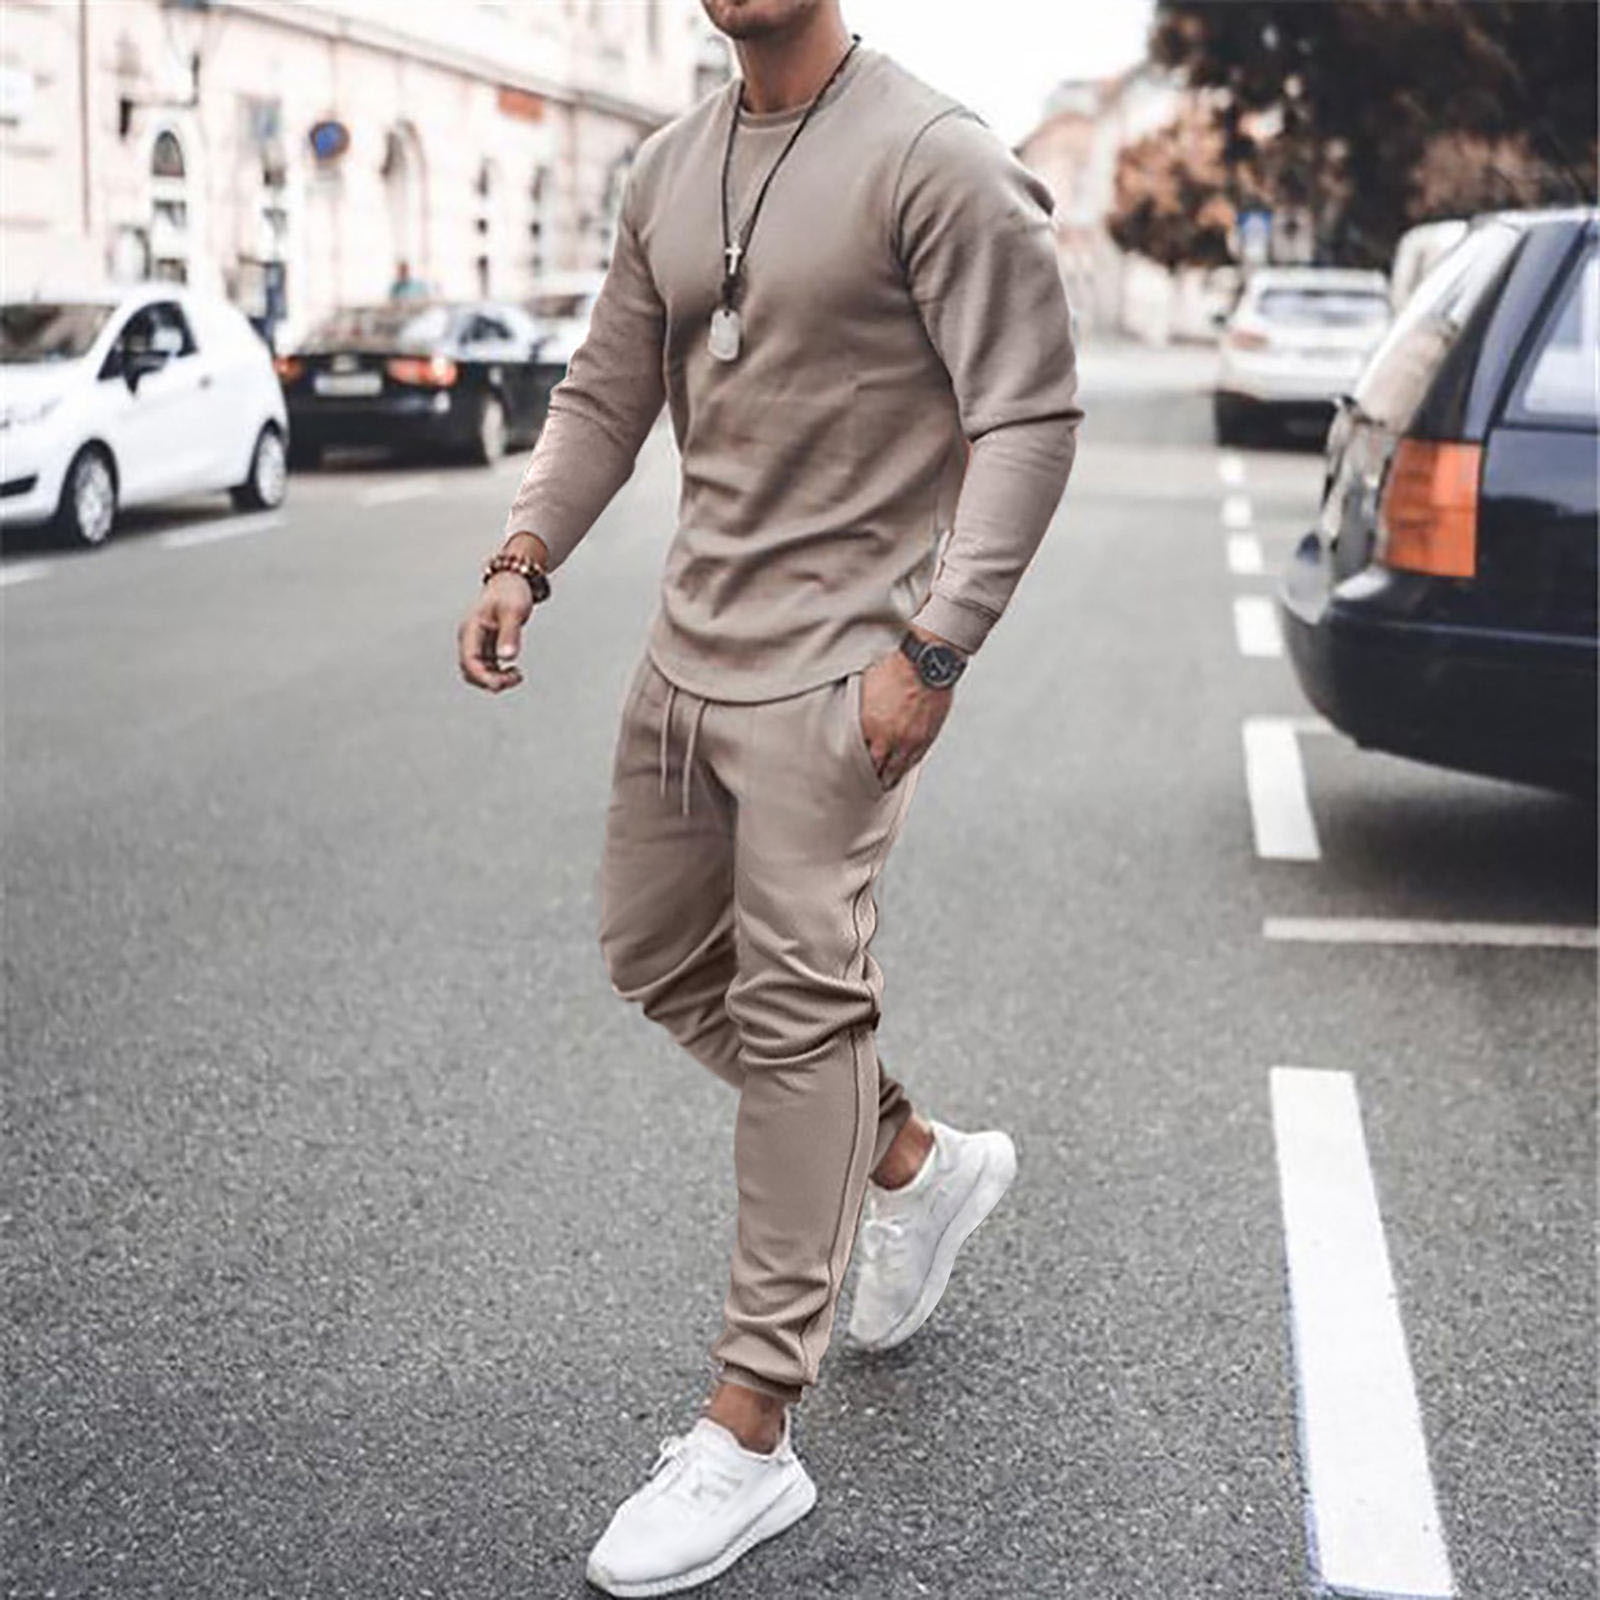 Podplug Fashion Sports Suits for Mens, Men's Athleisure Loose Fitness  Running Long Sleeve Multicolor Suit Sweatshirt and Pants / L 